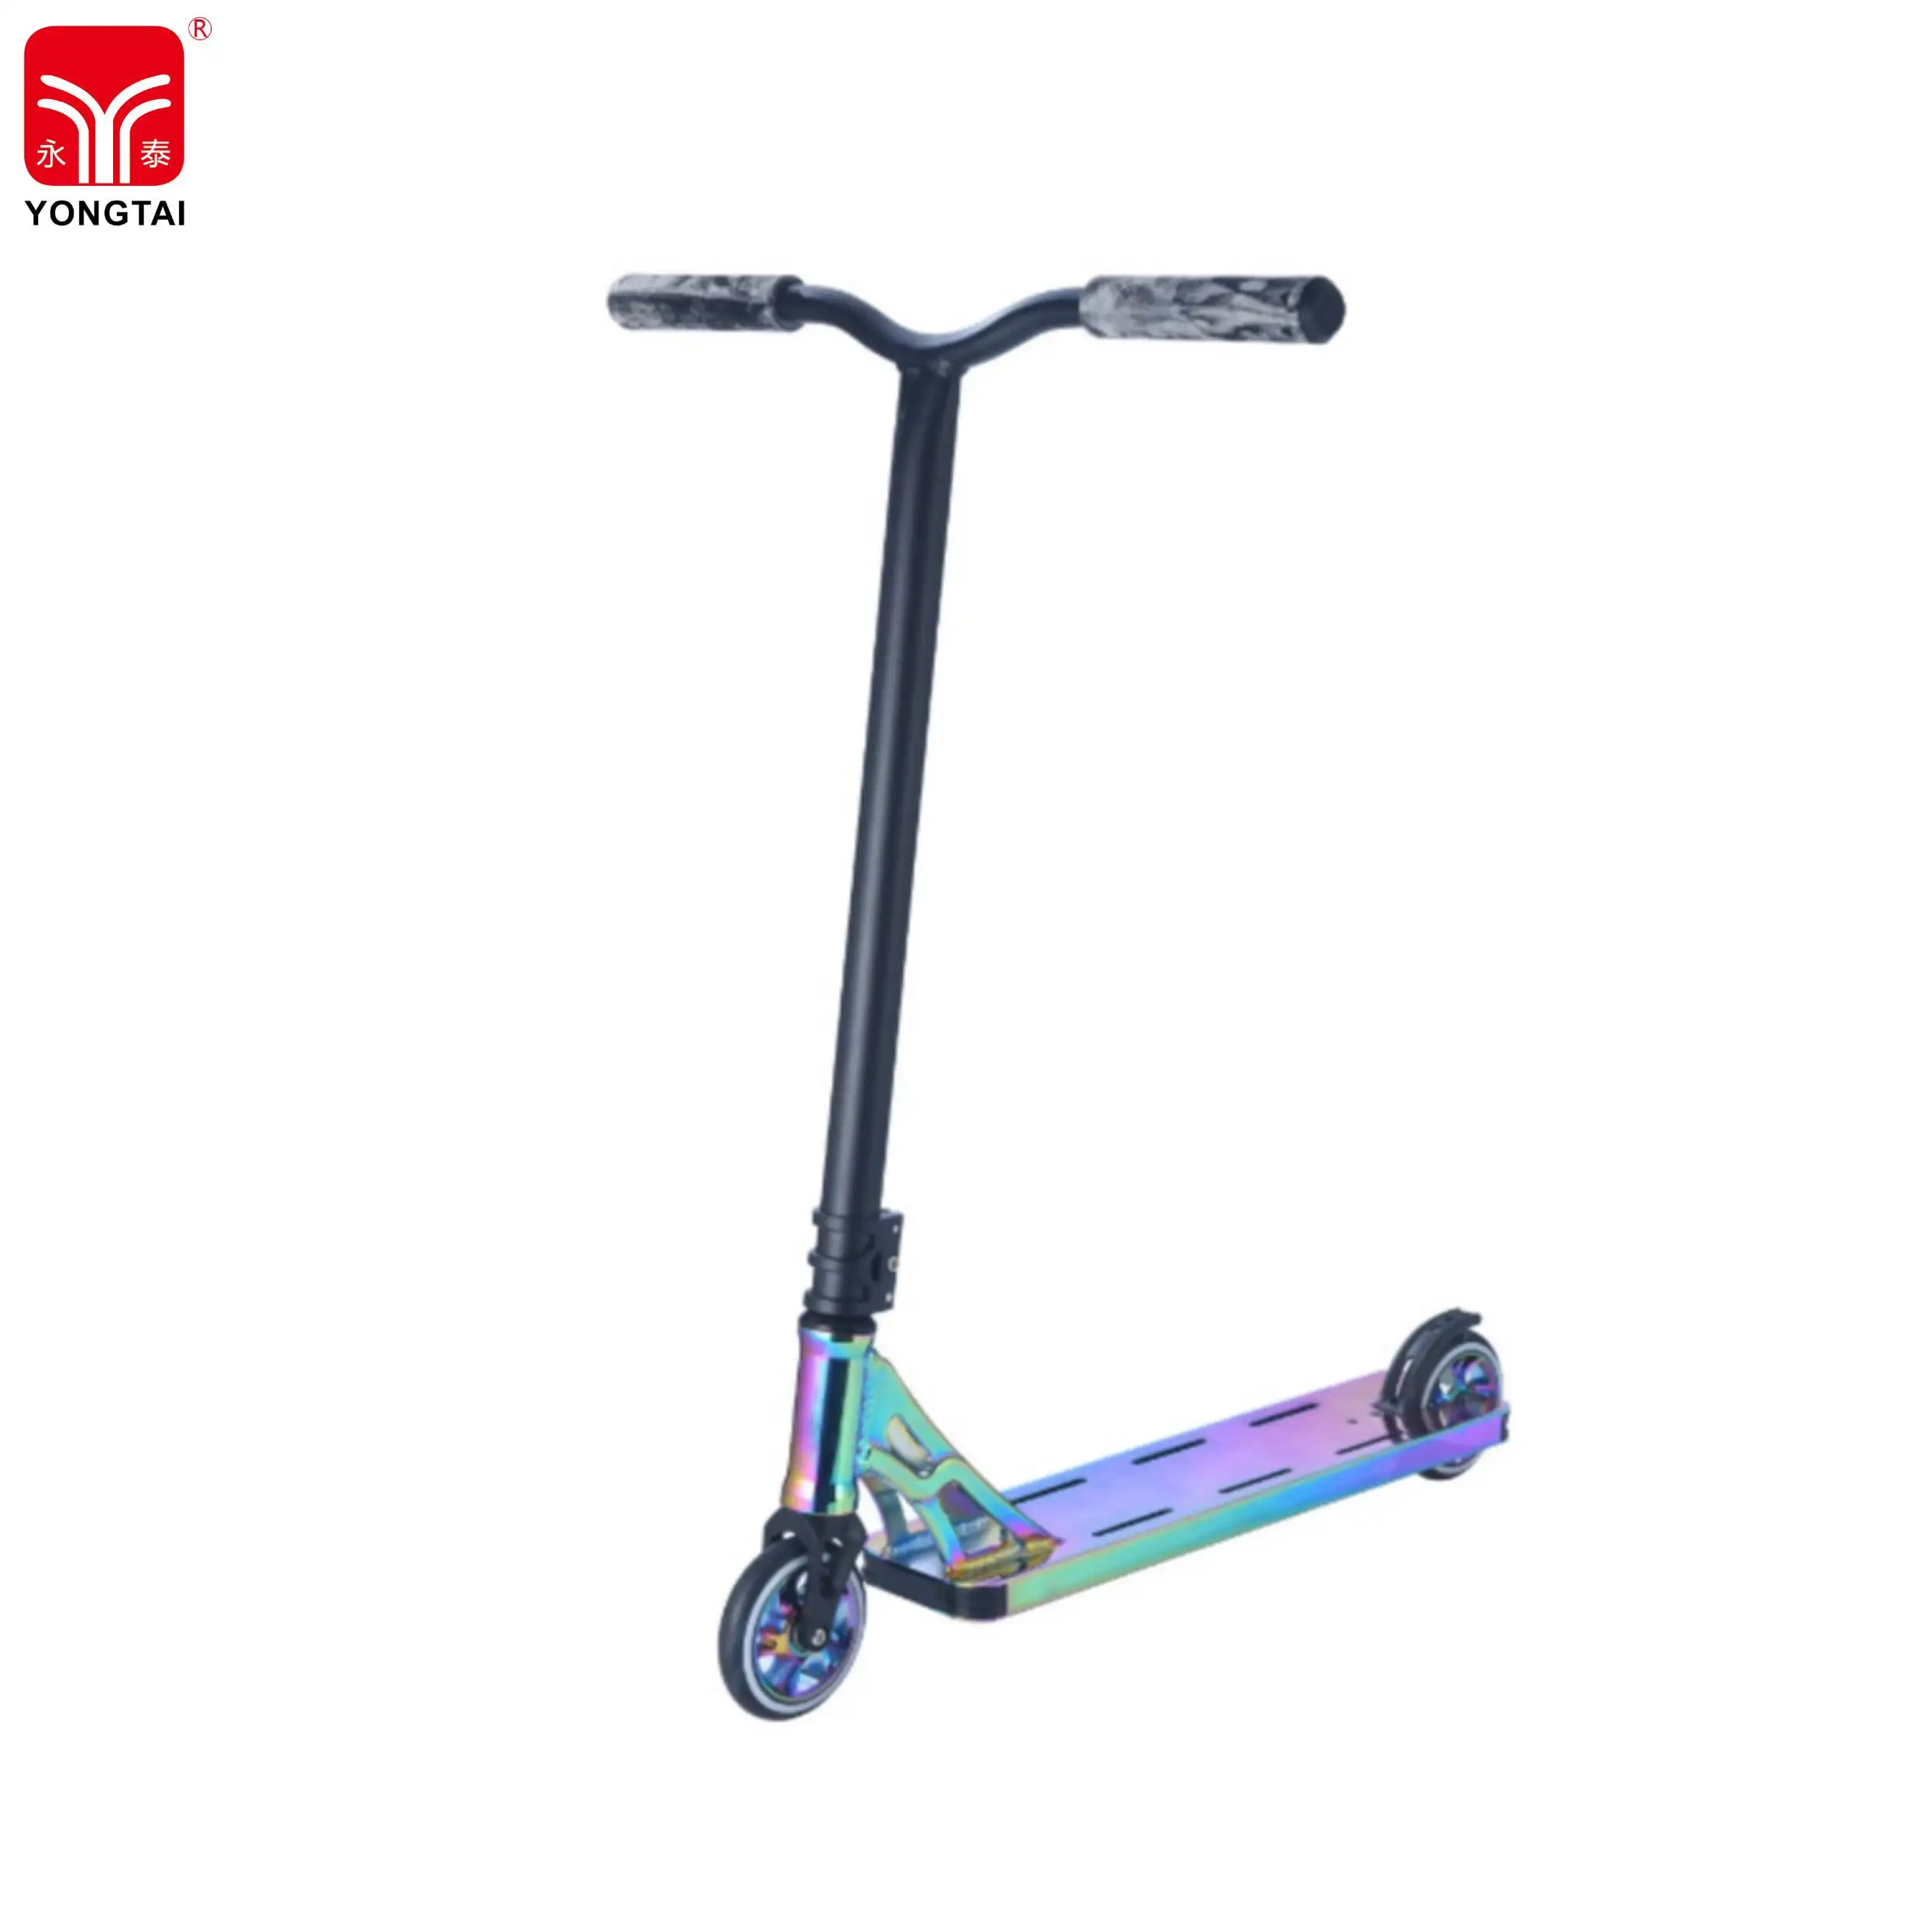 Wholesale Kids Scooter Led Foldable Adjustable Height Kids Design 3 Wheel Kick Kids Scooter With 3 Flashing Wheels